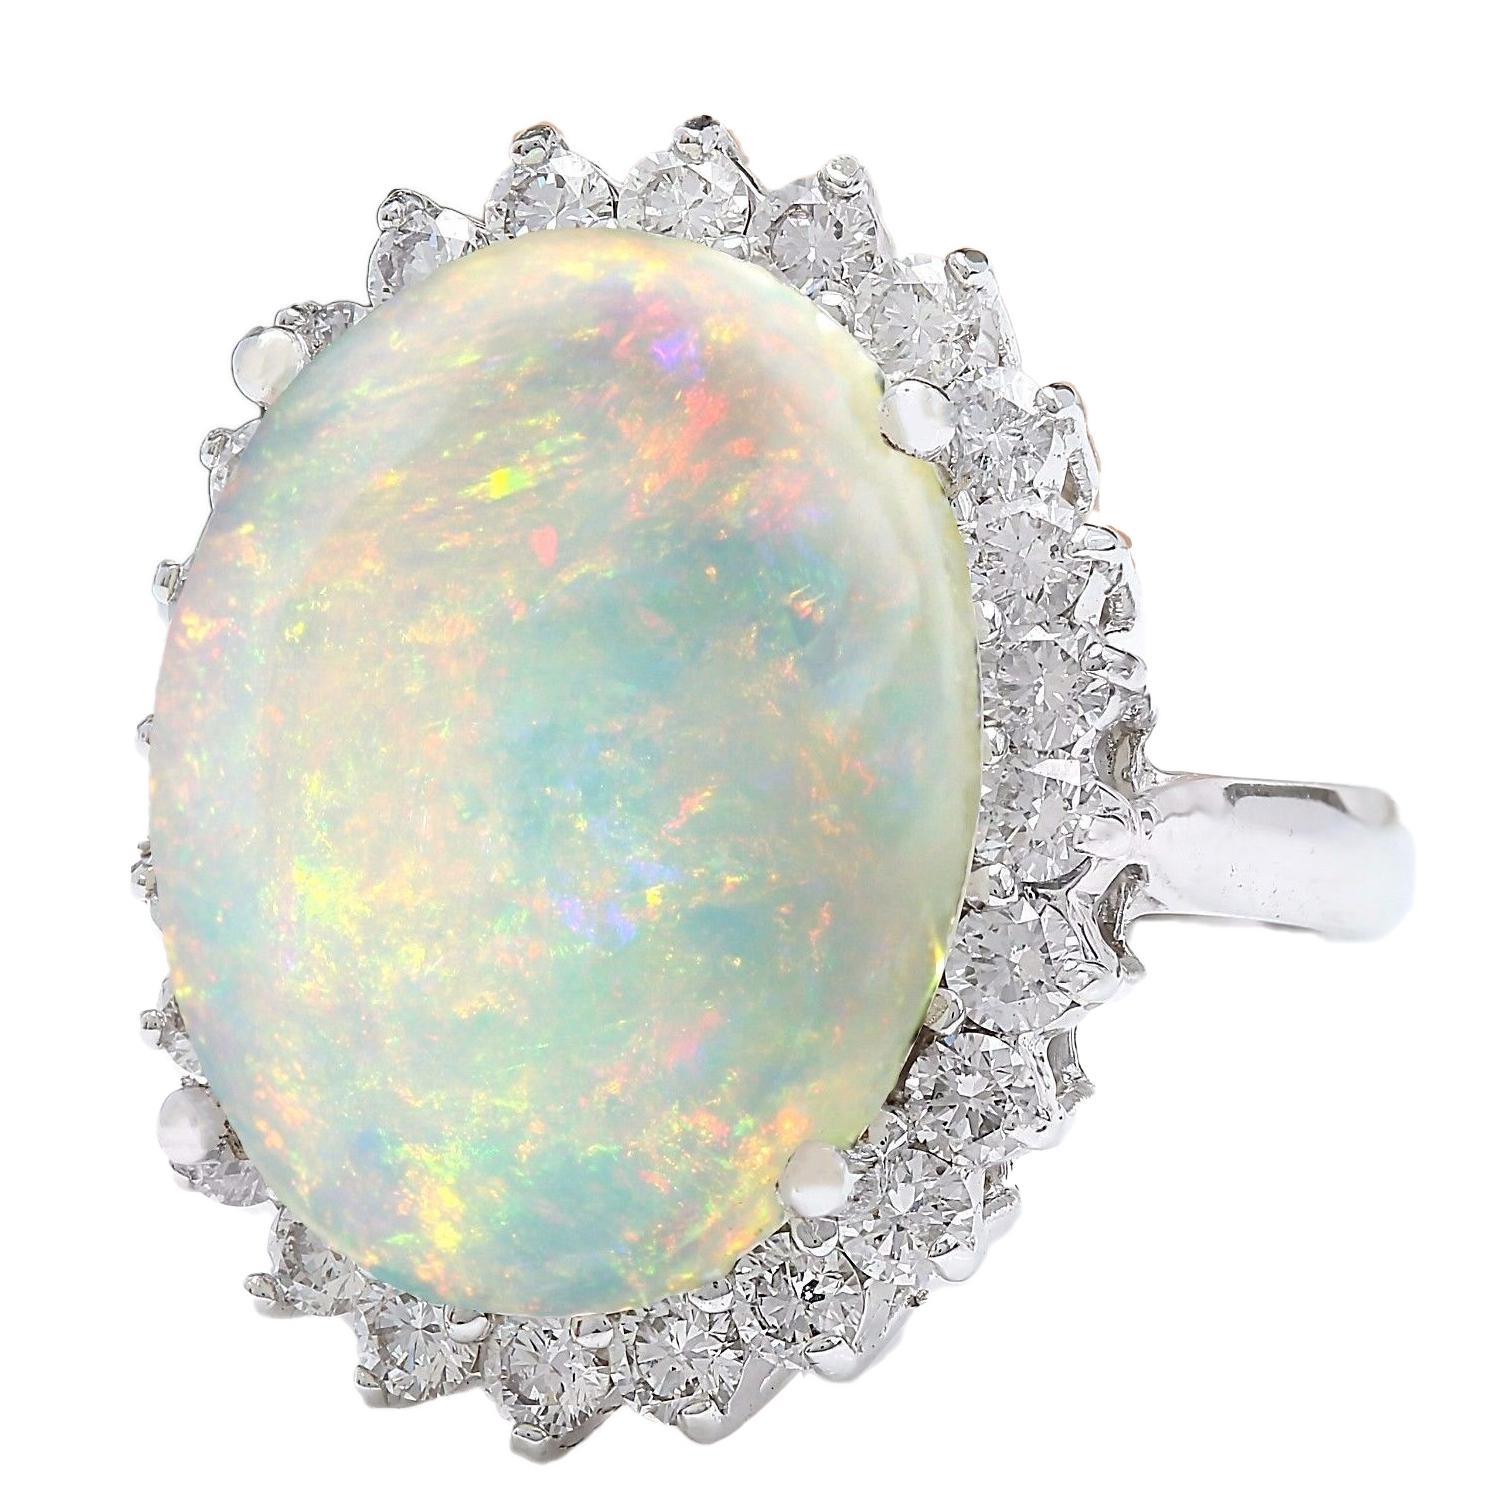 11.31 Carat Natural Opal 14K Solid White Gold Diamond Ring
 Item Type: Ring
 Item Style: Cocktail
 Material: 14K White Gold
 Mainstone: Opal
 Stone Color: Multicolor
 Stone Weight: 10.31 Carat
 Stone Shape: Oval
 Stone Quantity: 1
 Stone Dimensions: